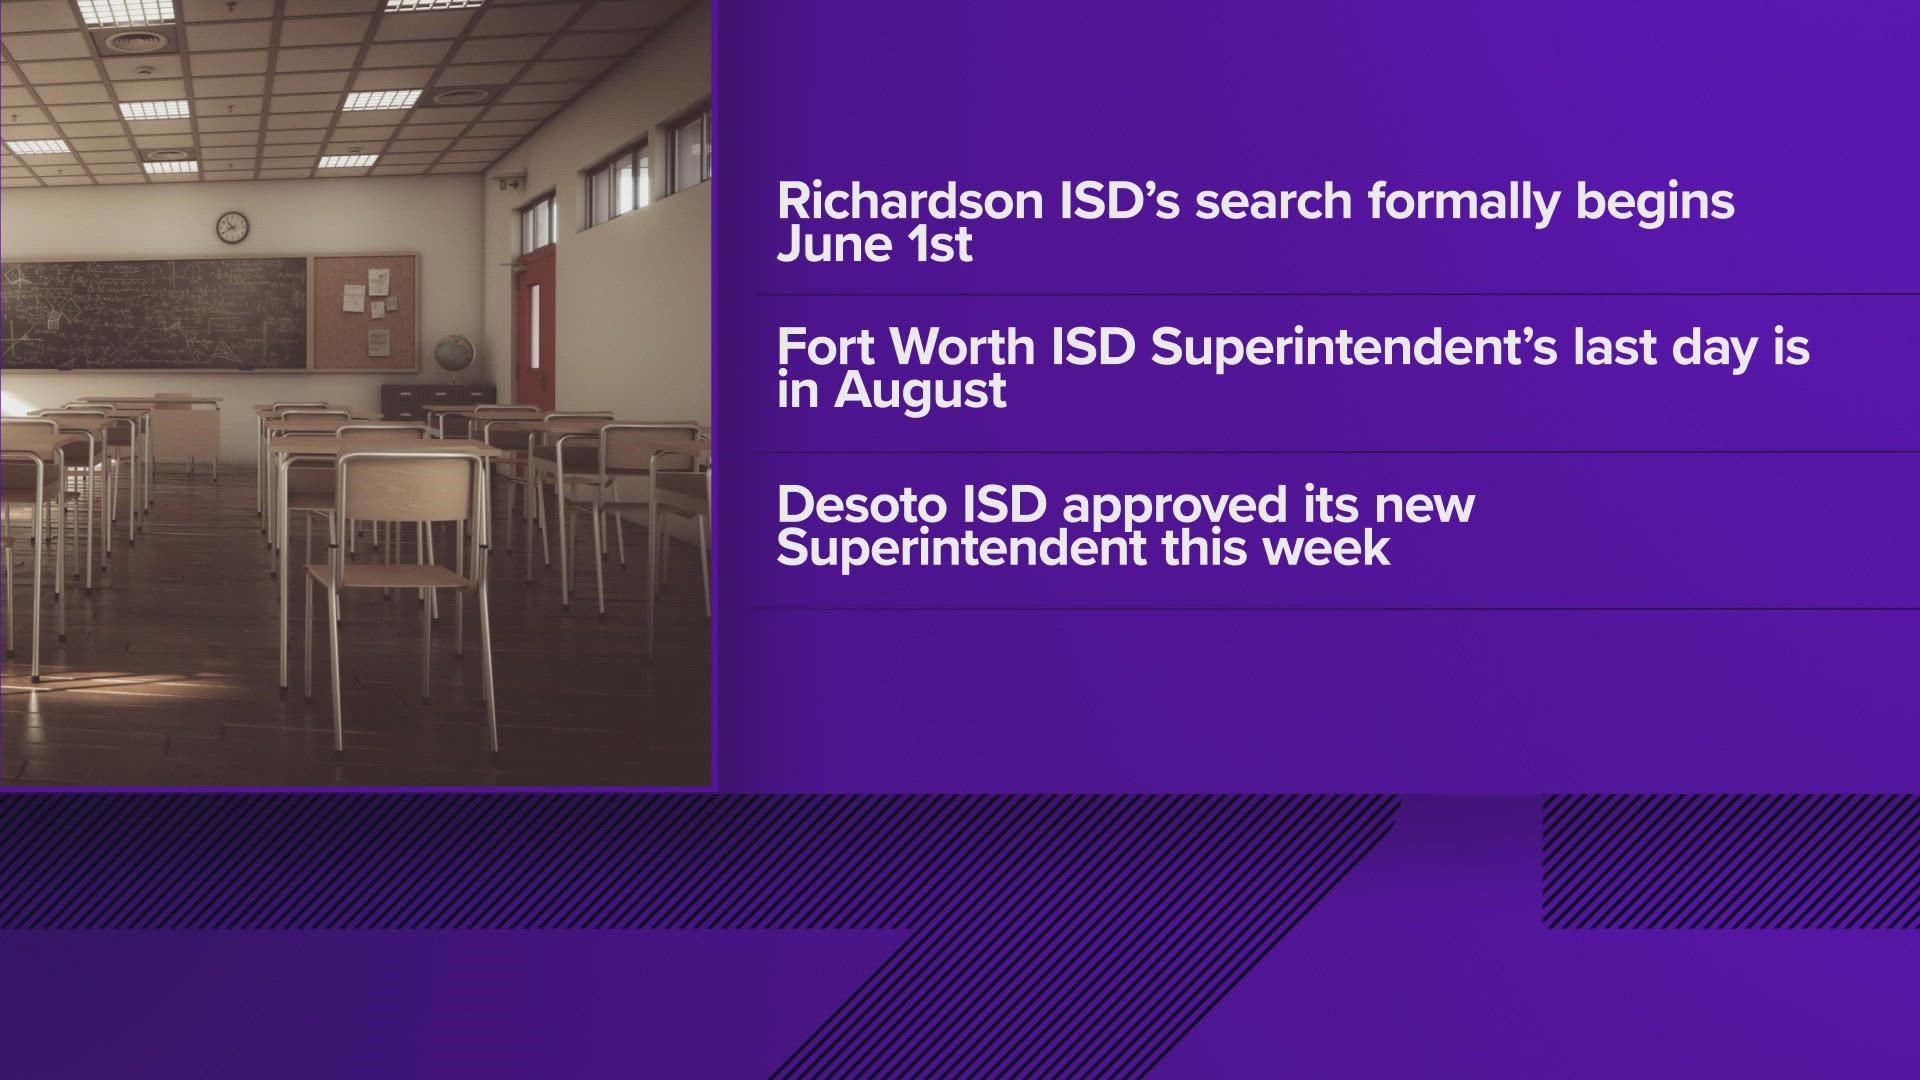 Several North Texas school districts will formally begin their search for a new superintendent soon.